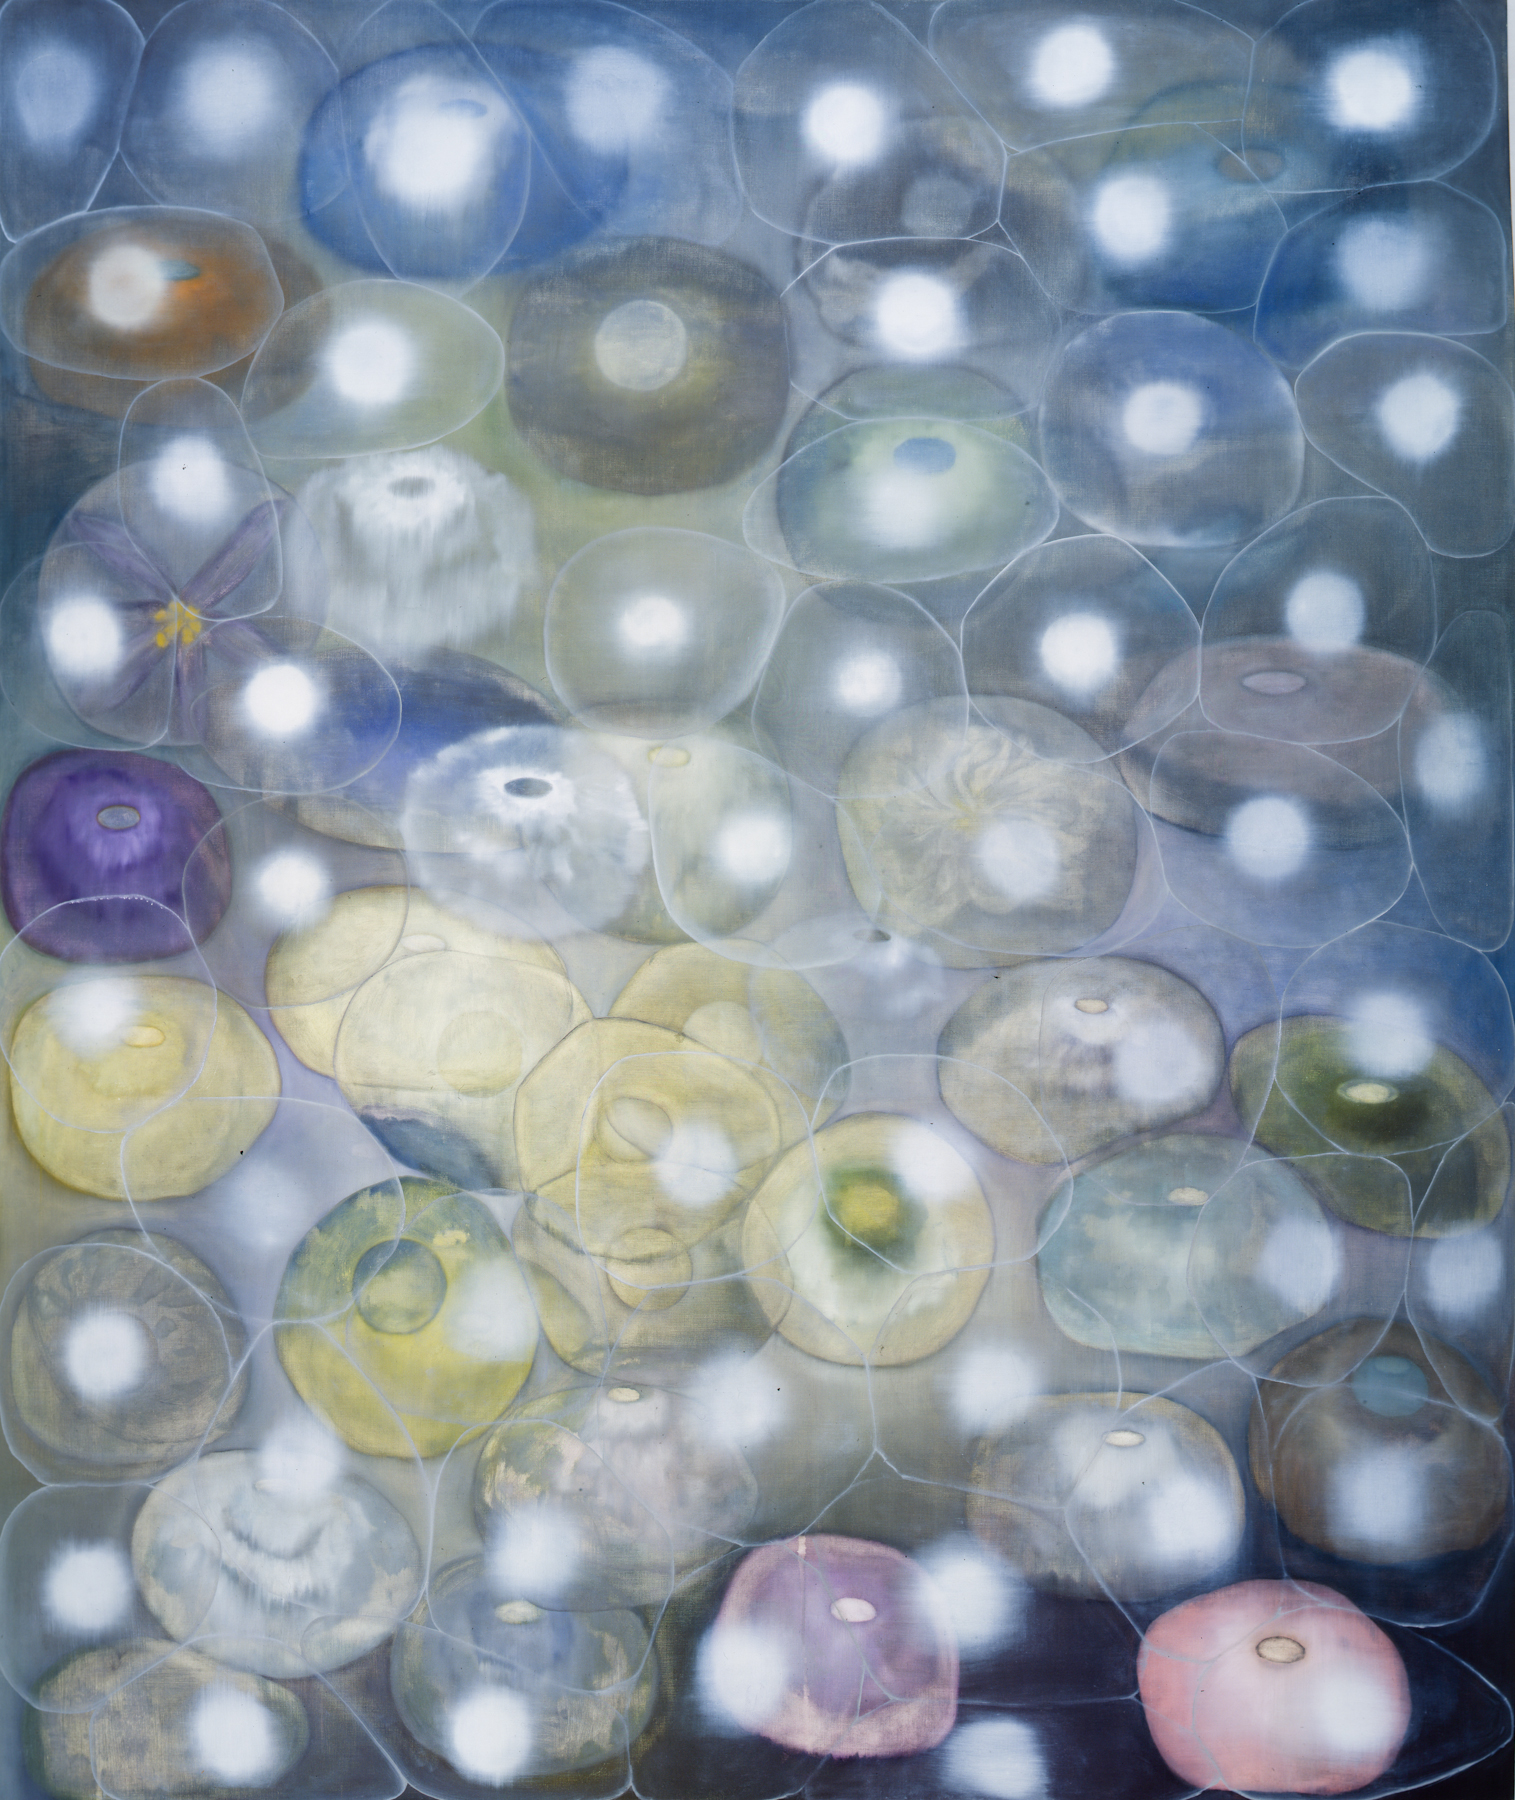 Ross Bleckner, In Sickness and Health, 1996, oil oon canvas, 213,3 x 182,8 cm